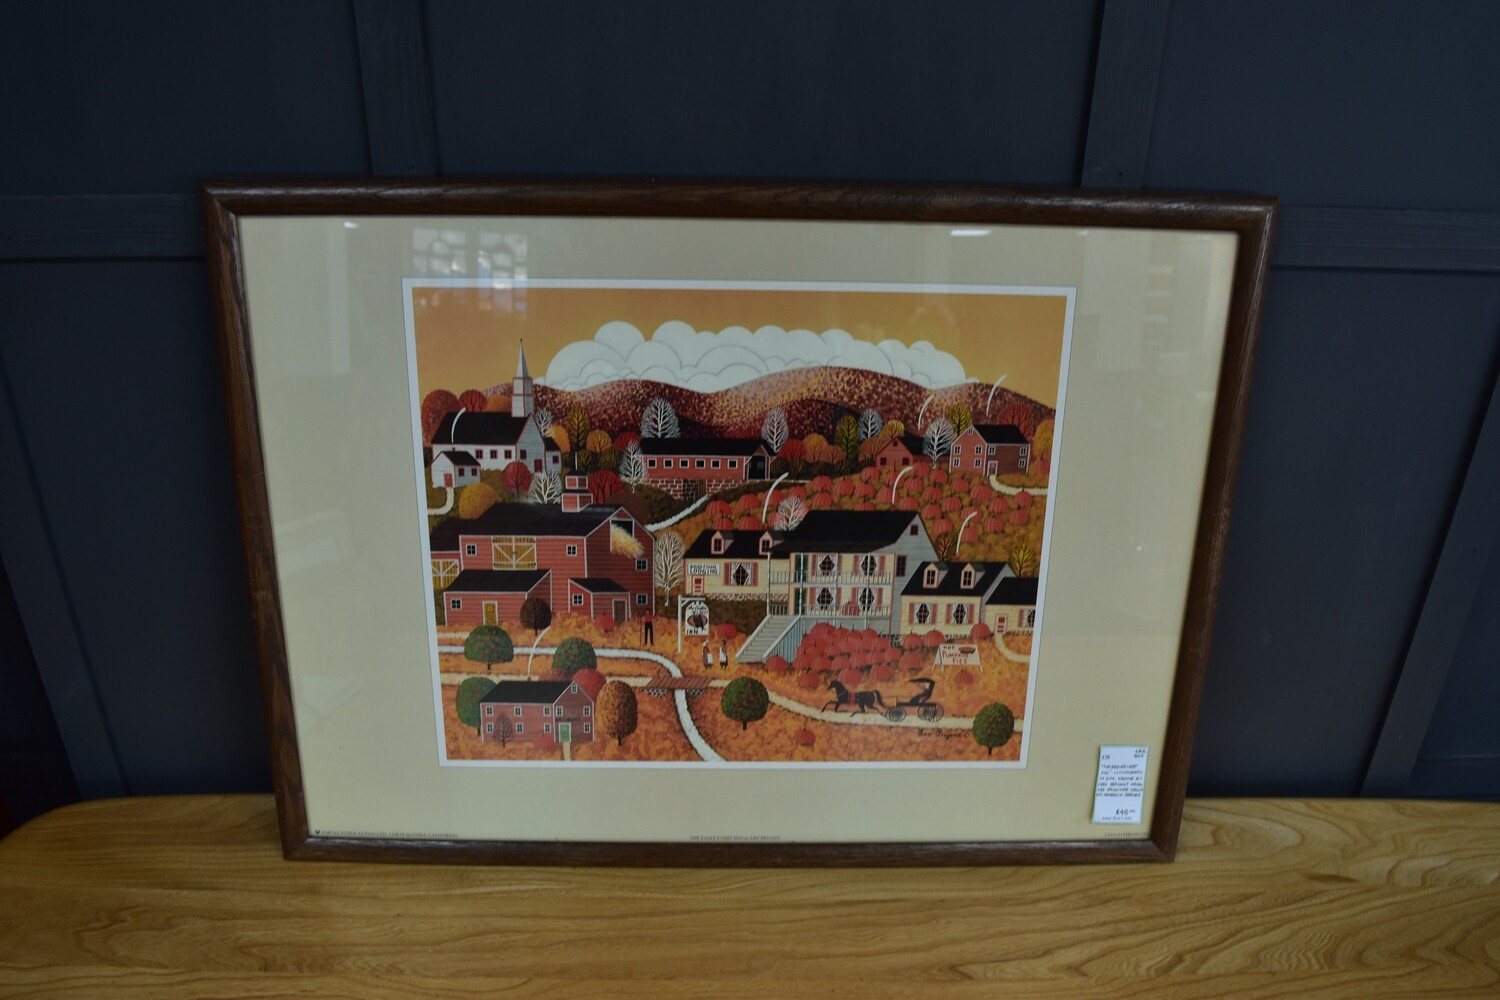 Primitive Views of America - "The Eagles Nest Inn" Lithograph in Oak Frame by Leo Bryant